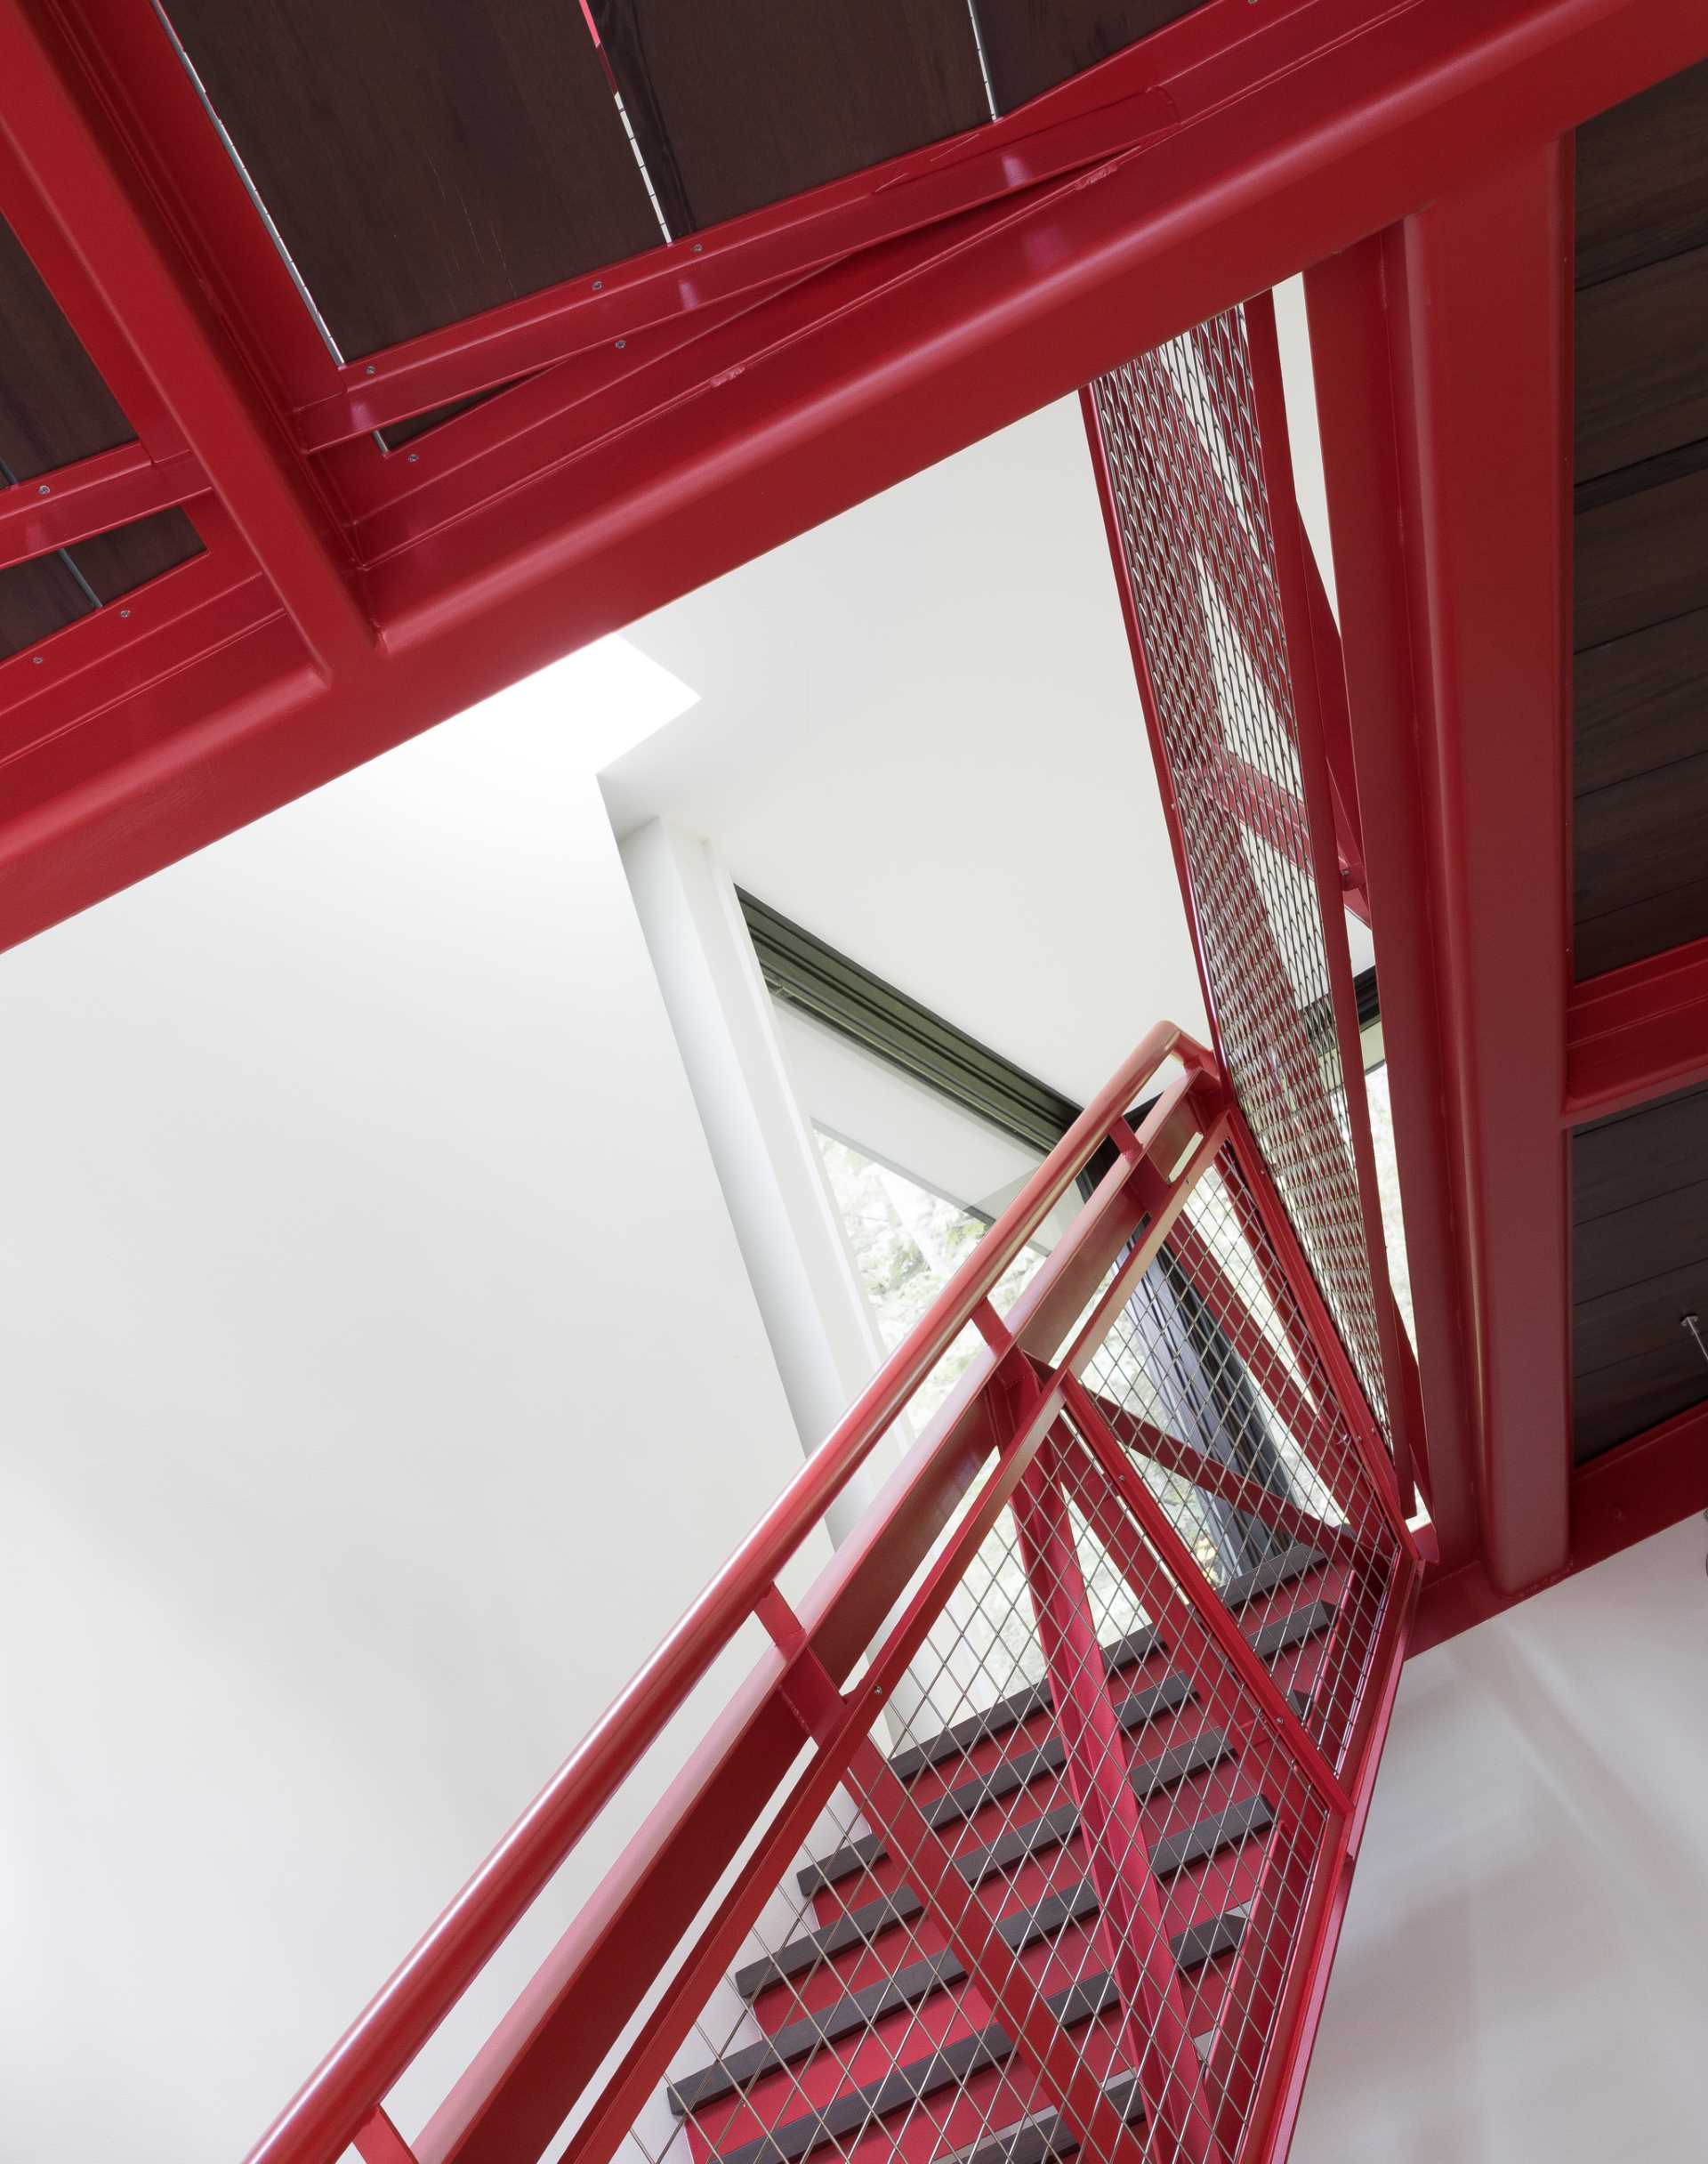 A red metal staircase designed by DeForest, connects the main living level of the home with the upper level.